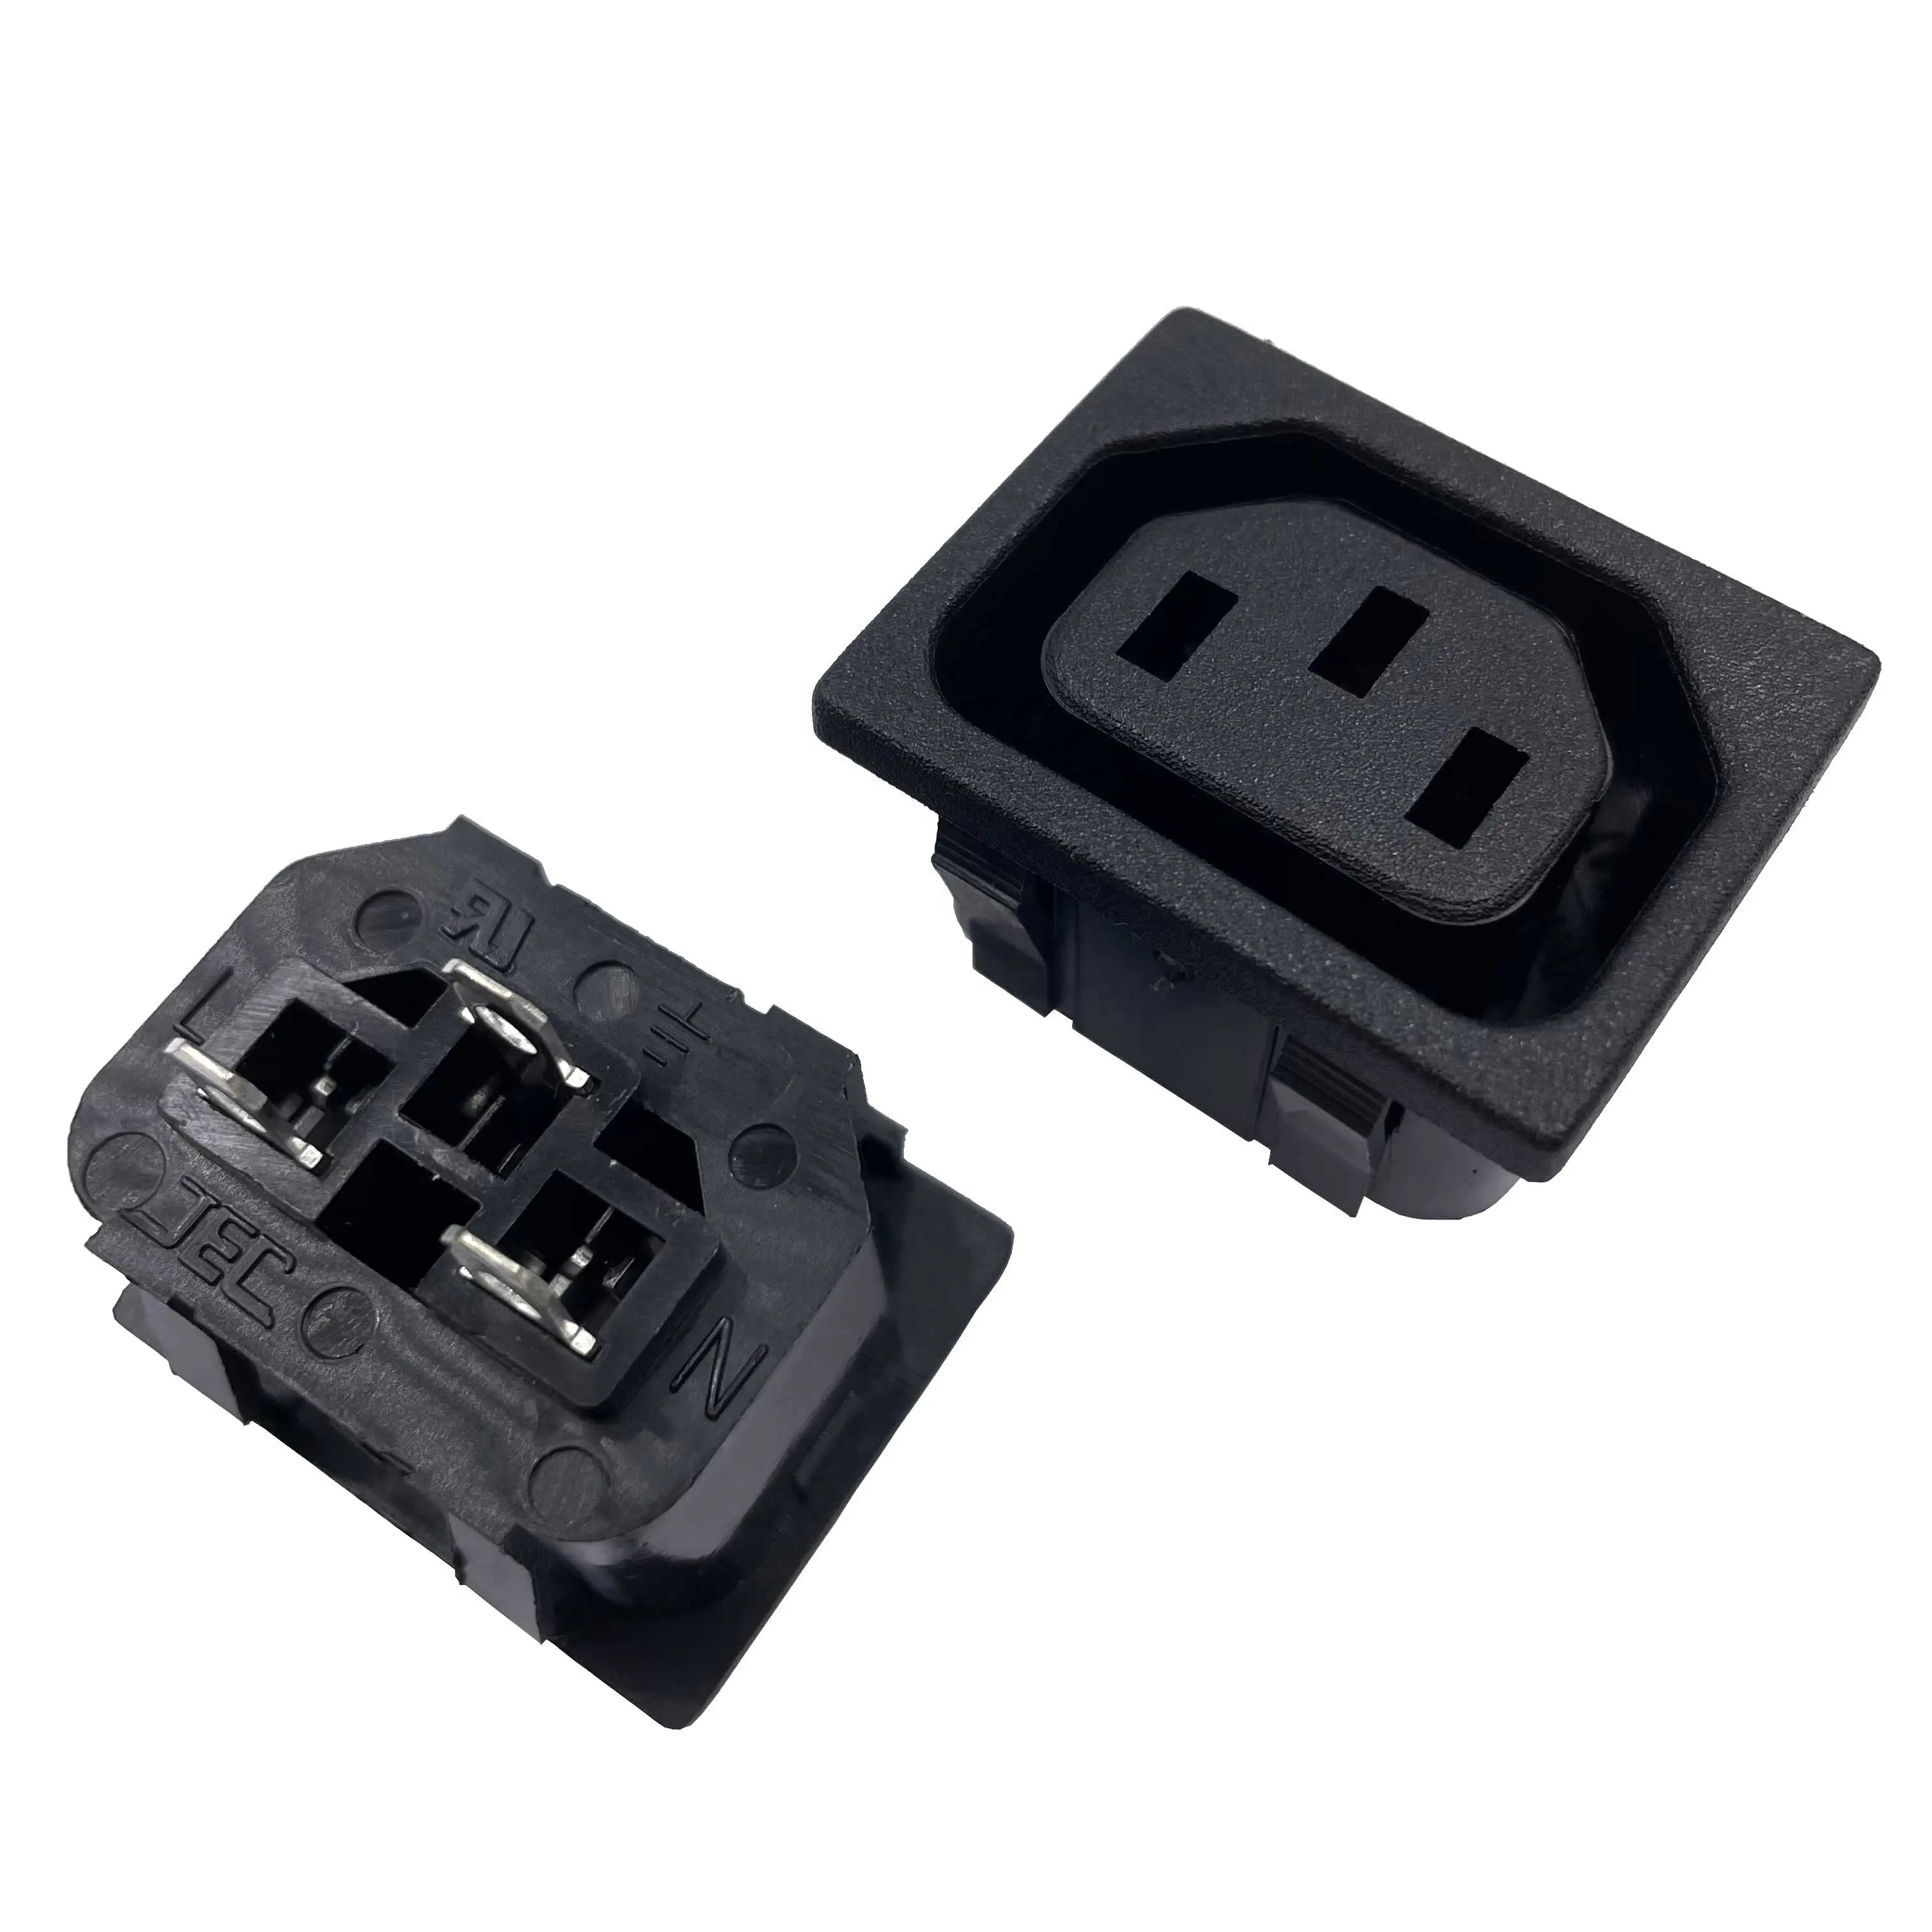 JR-121S-G High Quality China 10A 250V AC 3-Way Power Plug Socket Electronic Outlet Female Connectors Adapter Socket